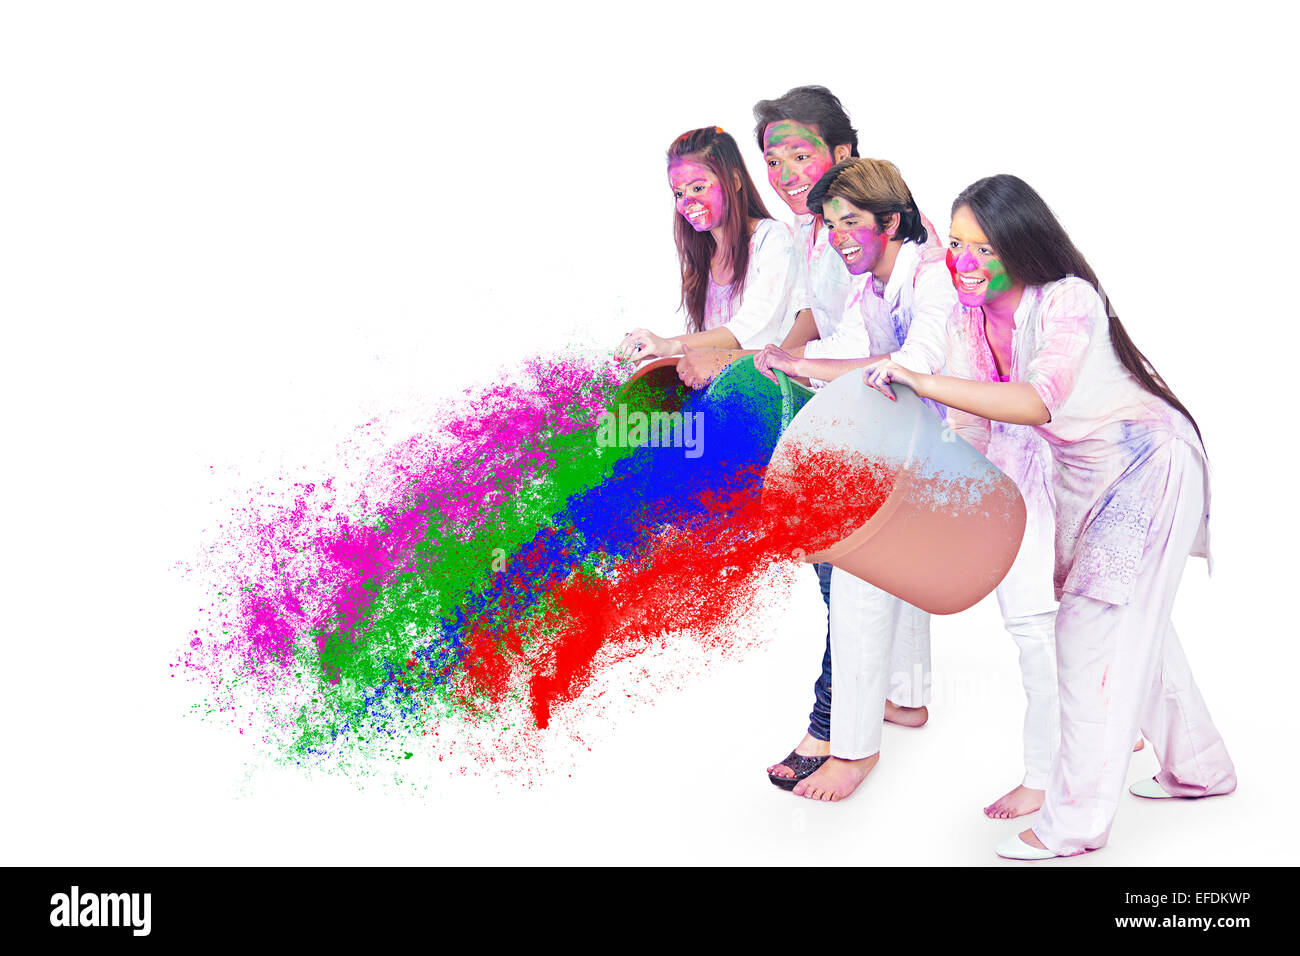 indian friends holi Festival Water Throwing Stock Photo